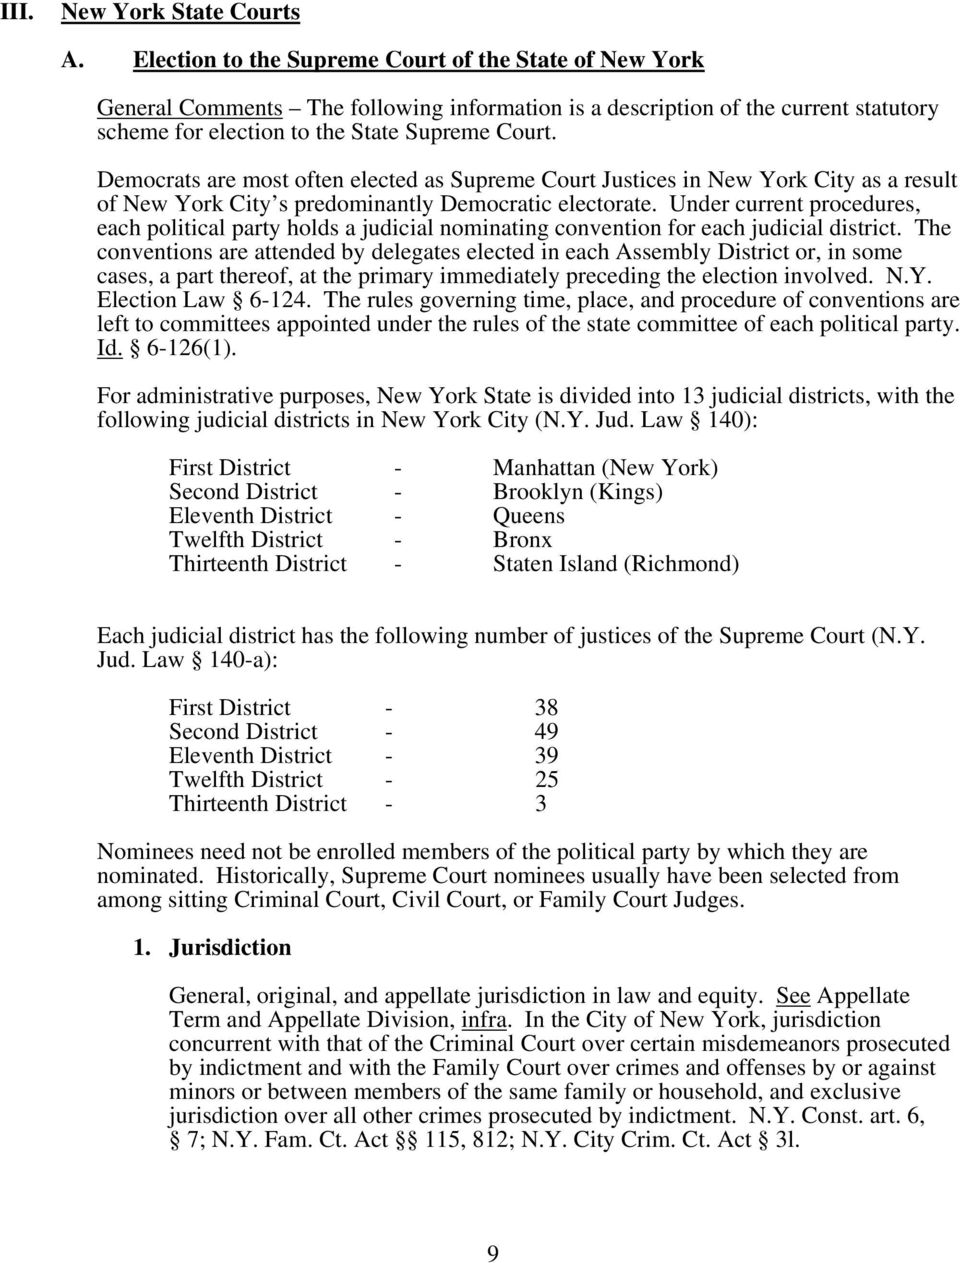 Democrats are most often elected as Supreme Court Justices in New York City as a result of New York City s predominantly Democratic electorate.